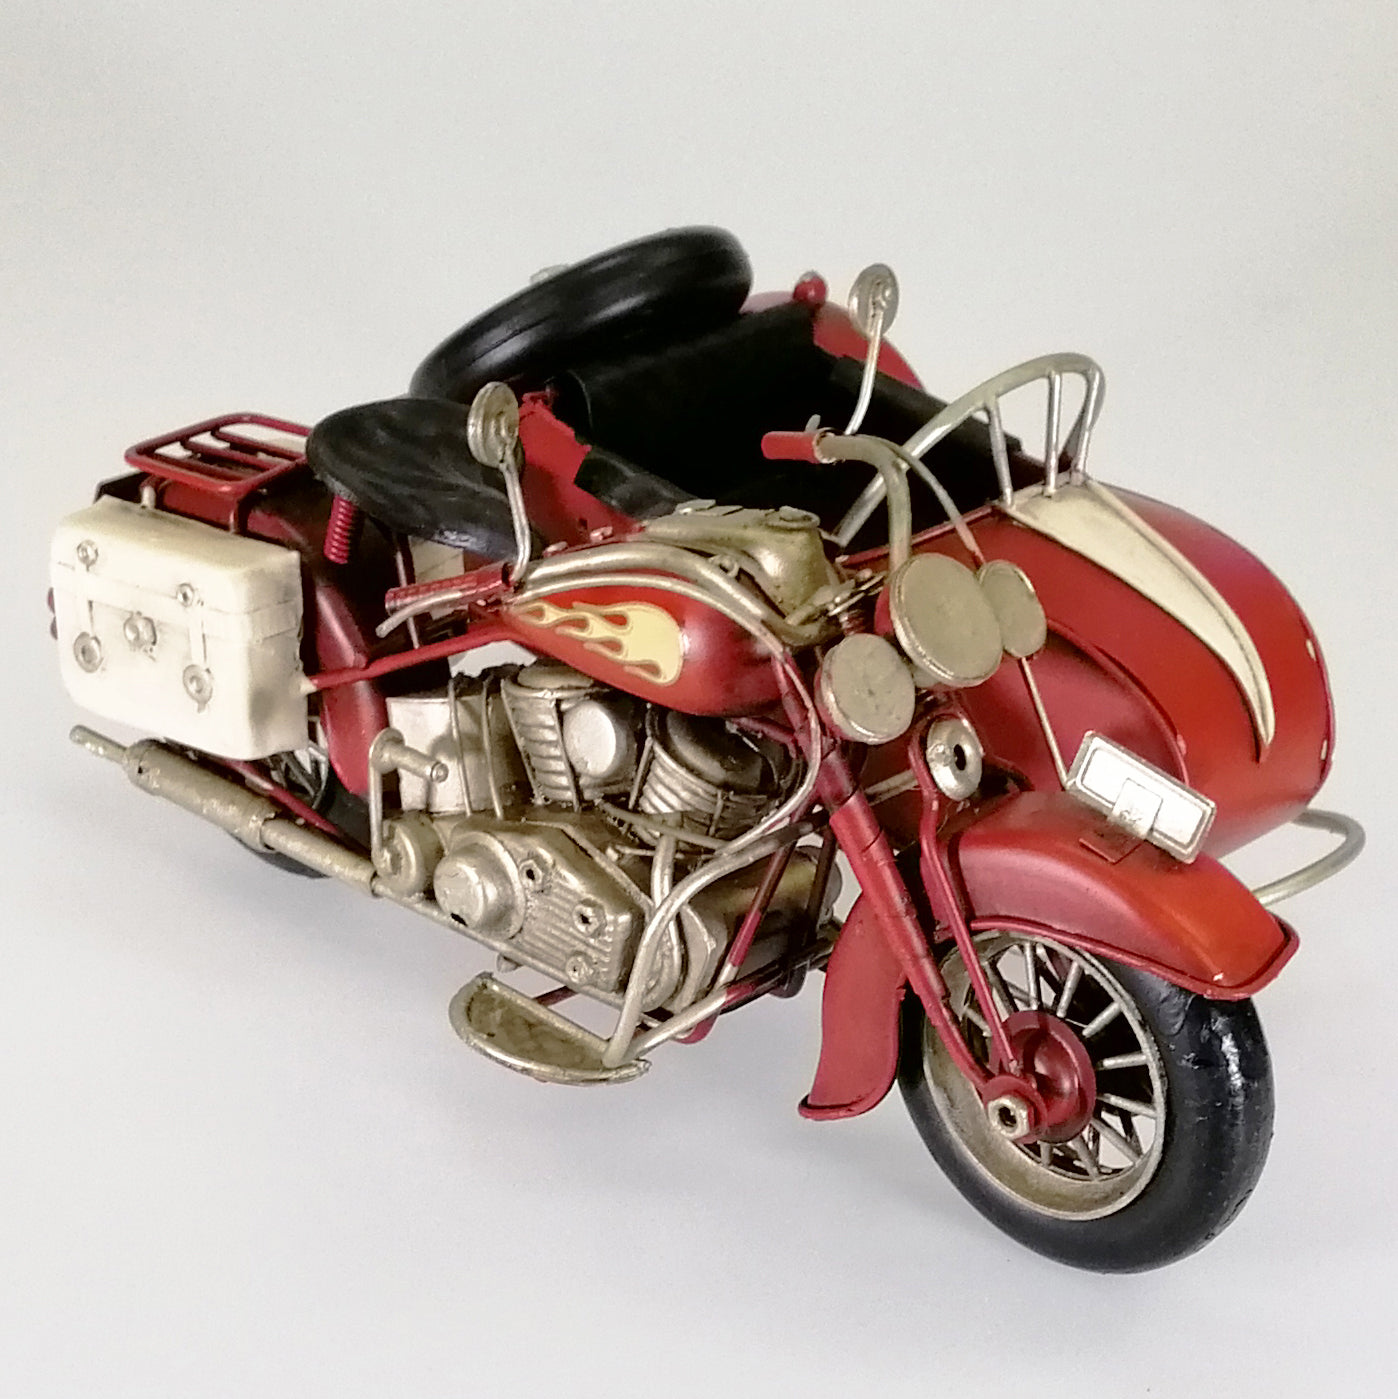 Vintage Red Motorcycle and Side Car Sculpture